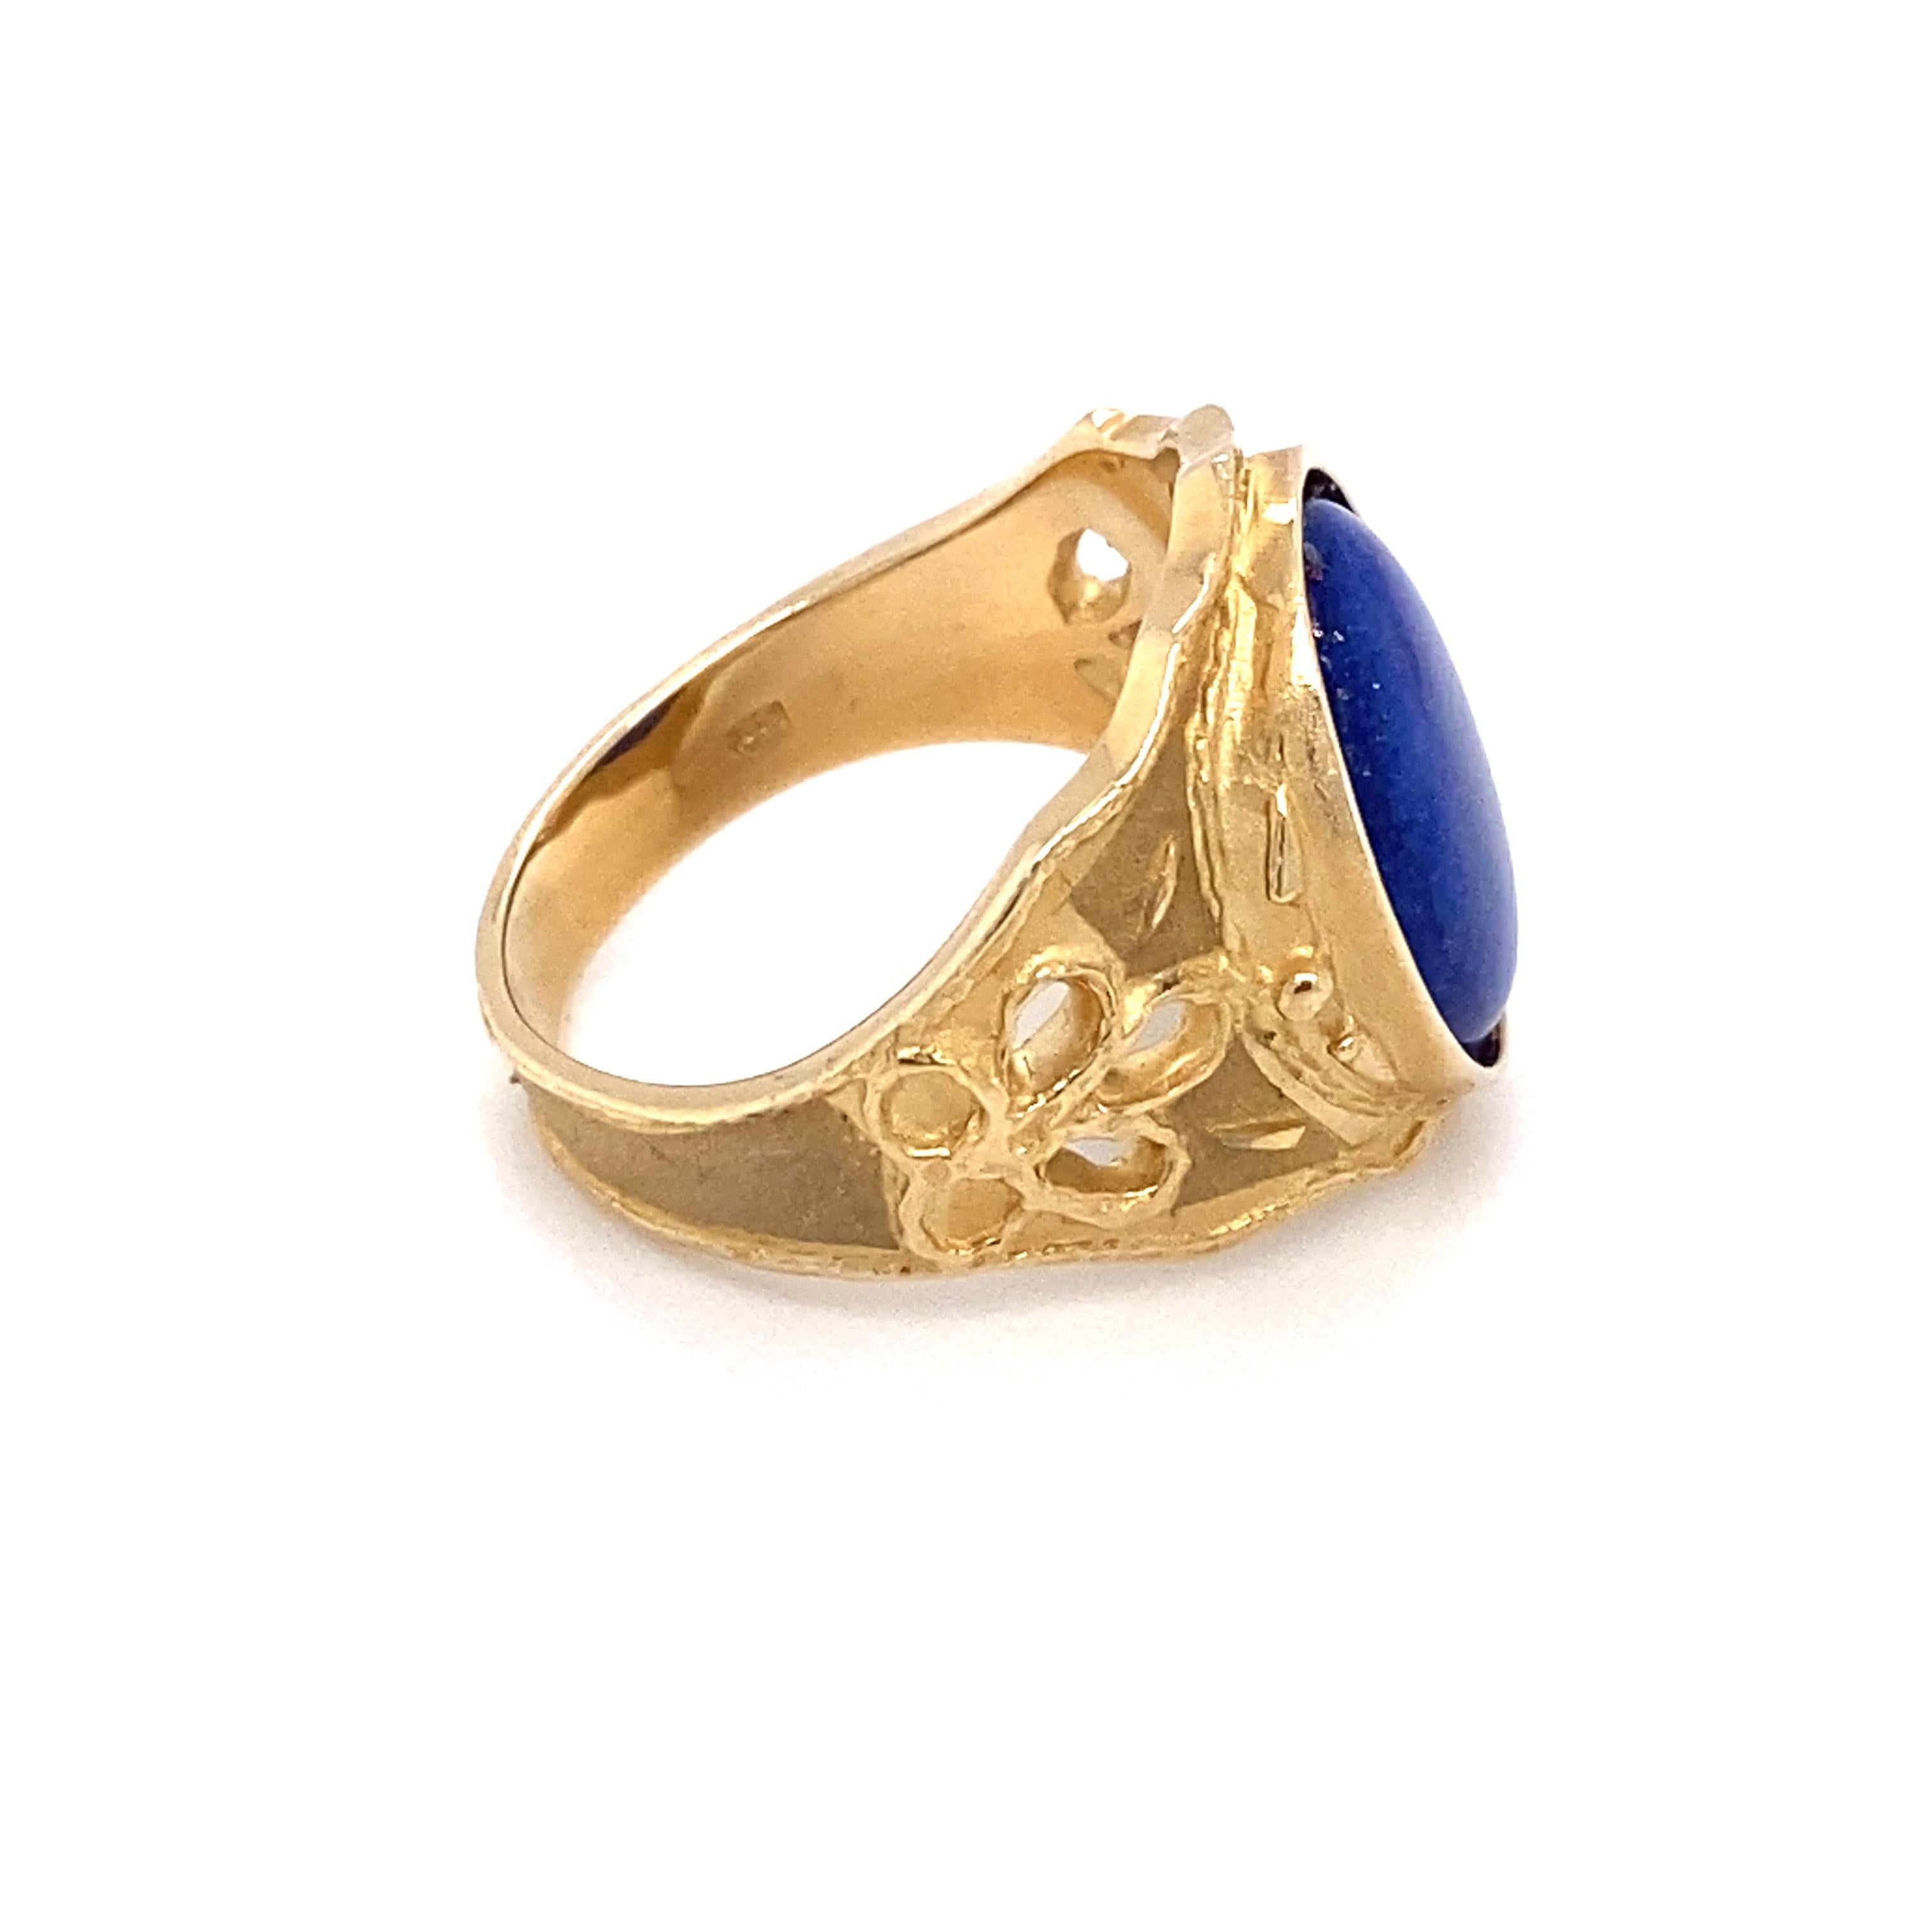 Oval Cut circa 1960s Oval Lapis Lazuli Ring with Carved Floral Motif in 14K Gold